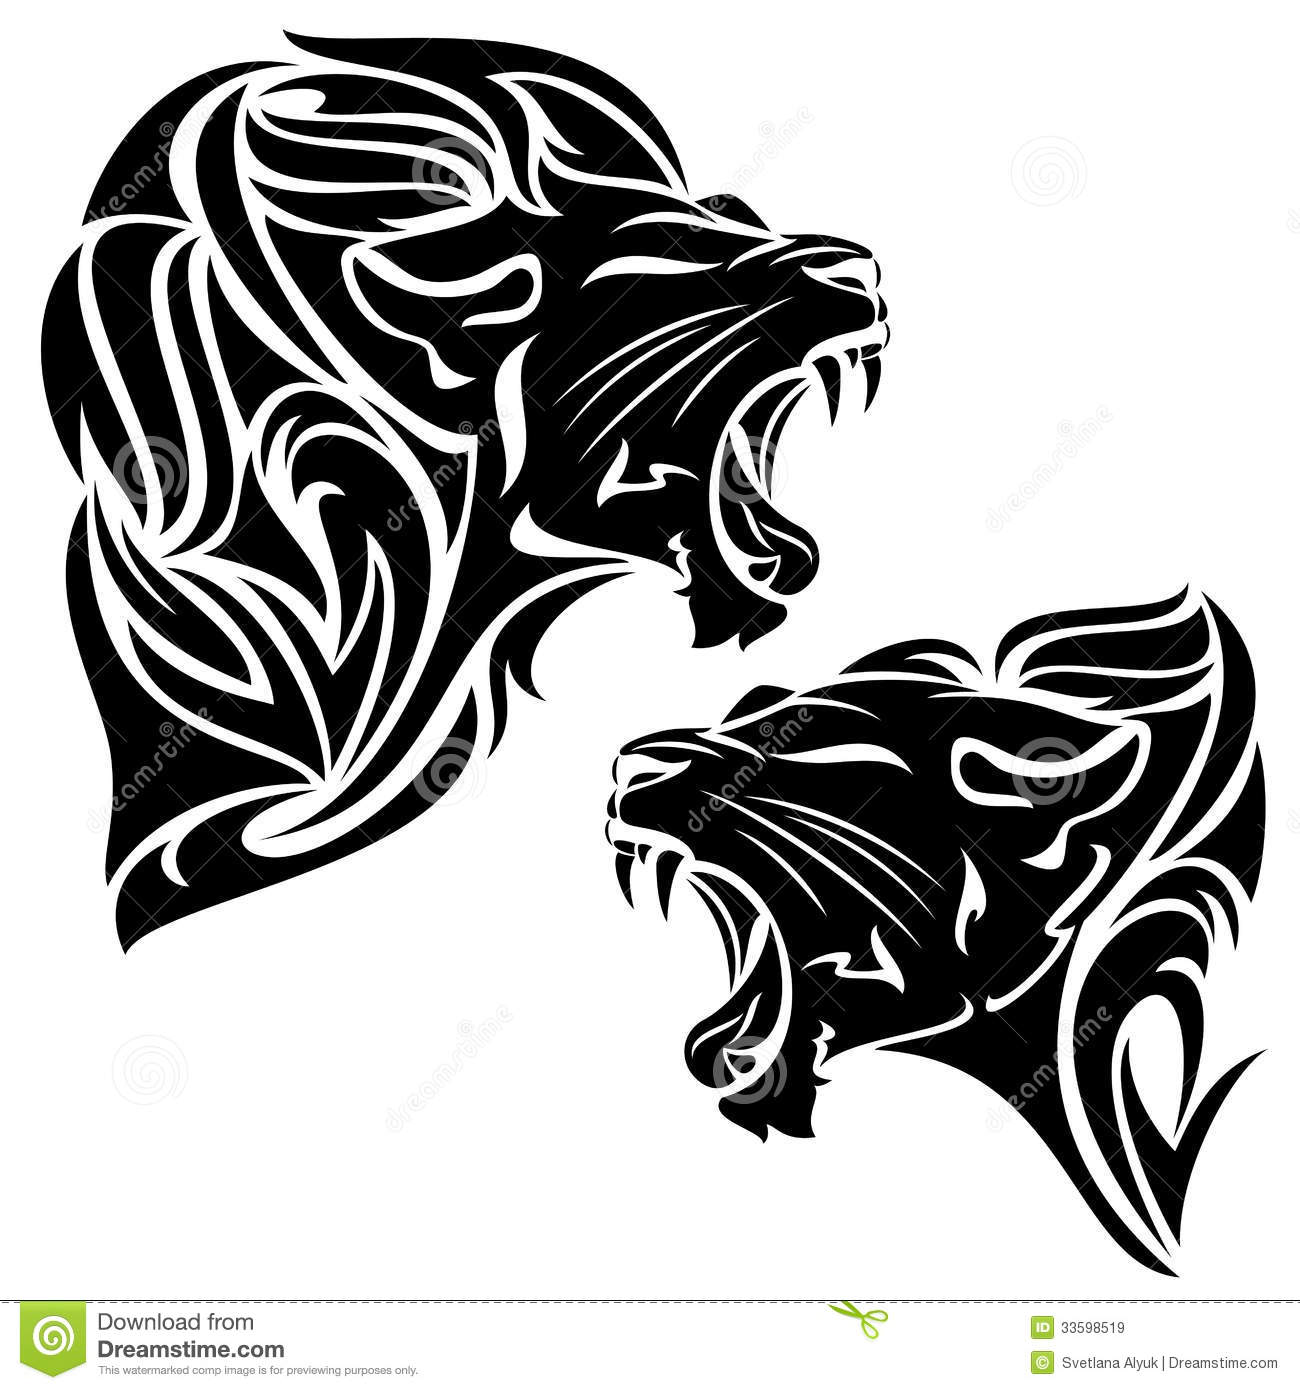 Roaring Lion And Panther Black And White Tribal Design